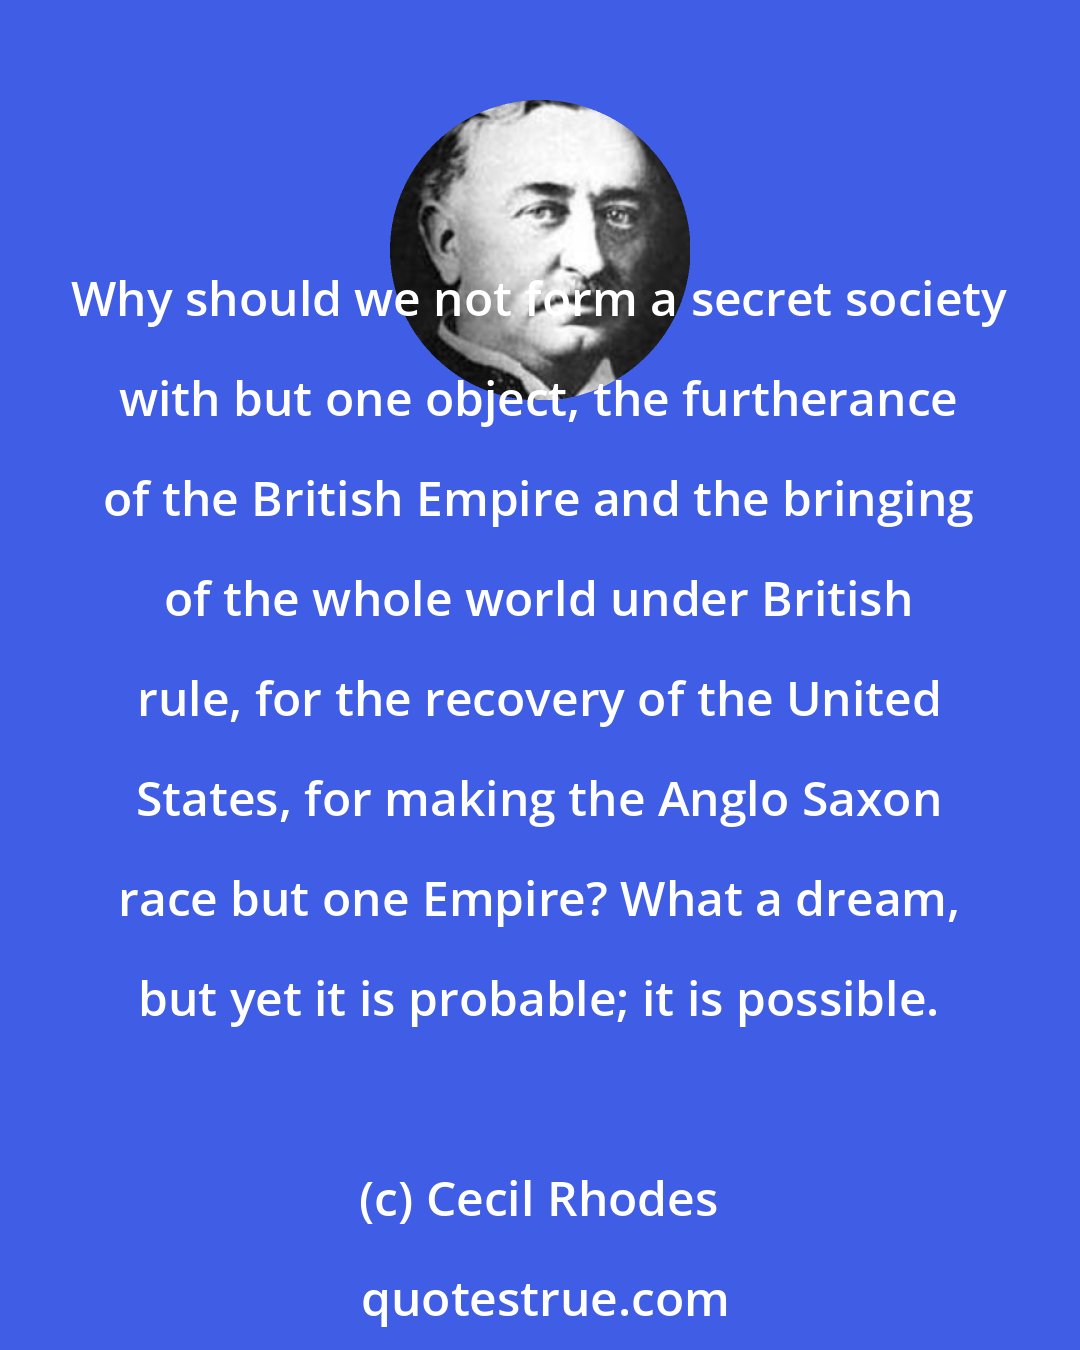 Cecil Rhodes: Why should we not form a secret society with but one object, the furtherance of the British Empire and the bringing of the whole world under British rule, for the recovery of the United States, for making the Anglo Saxon race but one Empire? What a dream, but yet it is probable; it is possible.